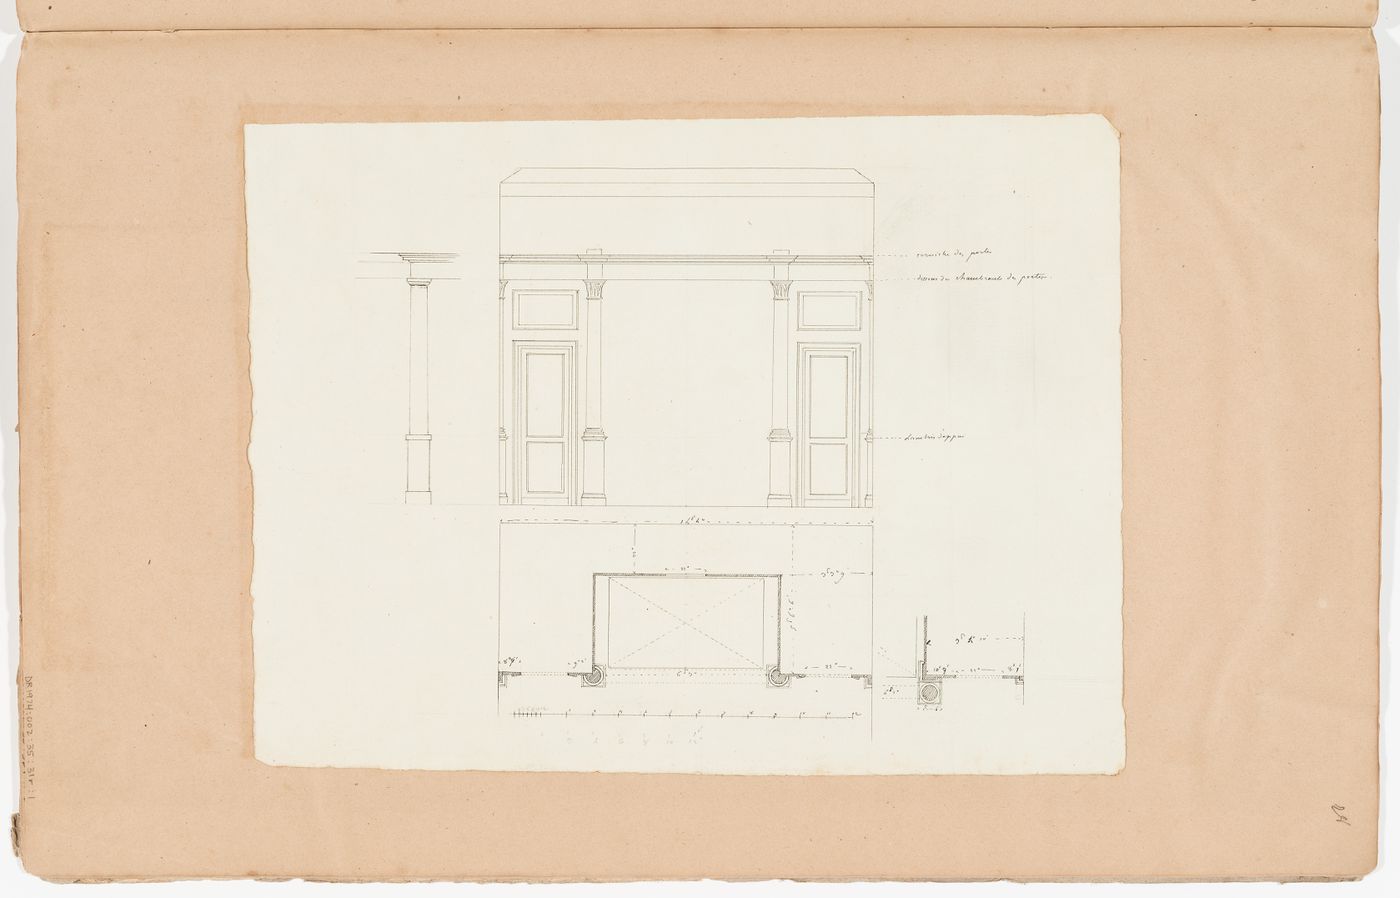 Plan and interior wall elevation for a bed alcove; verso: Perspective and plan for a bed alcove